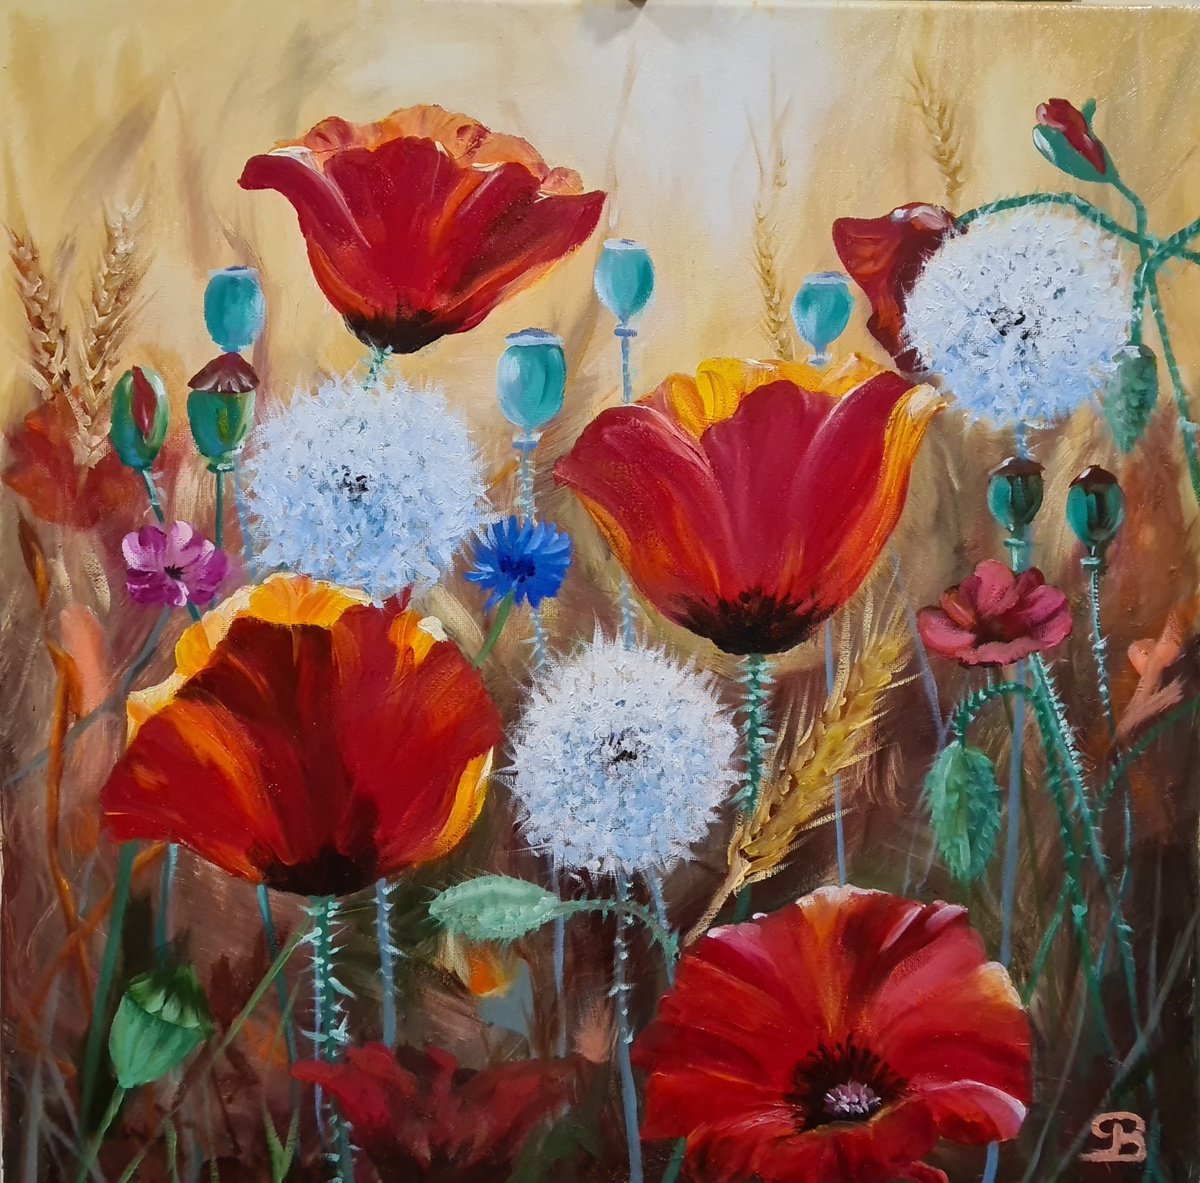 Poppies by George Budai